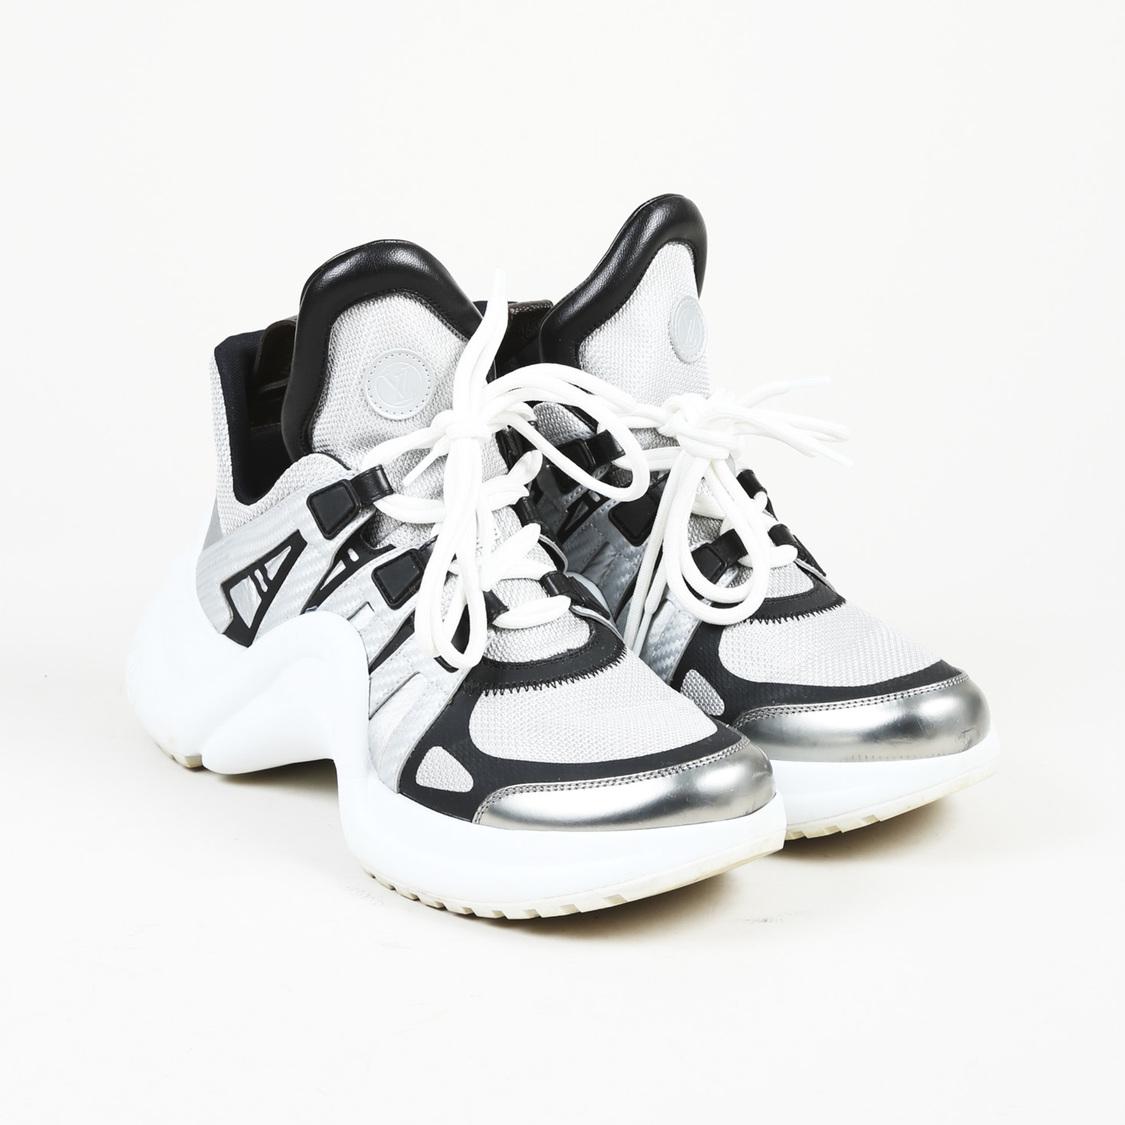 Louis Vuitton &quot;lv Archlight&quot; Calf Leather Sneakers in White/Gray (White) - Lyst